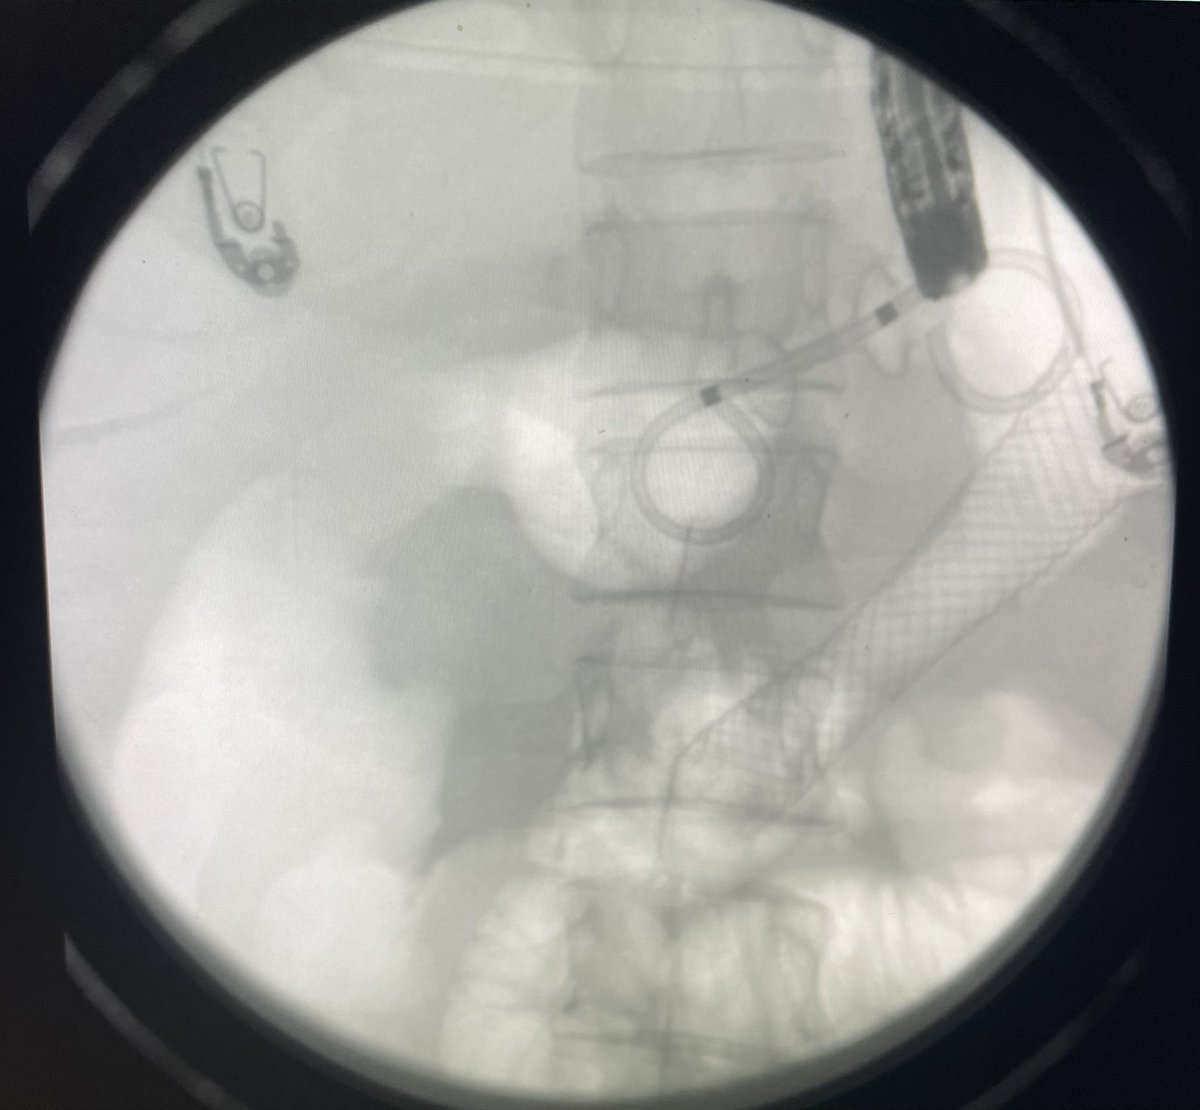 😱😱😱😱😱 Endoscopic gastroduodenostomy in patient with prior Bilroth II now with obstructing gastric mass resulting in closed loop obstruction of the afferent loop. Well done @MuzaffarAkbar 👏🏽 @ASGEendoscopy #GITwitter @UpstateGastro